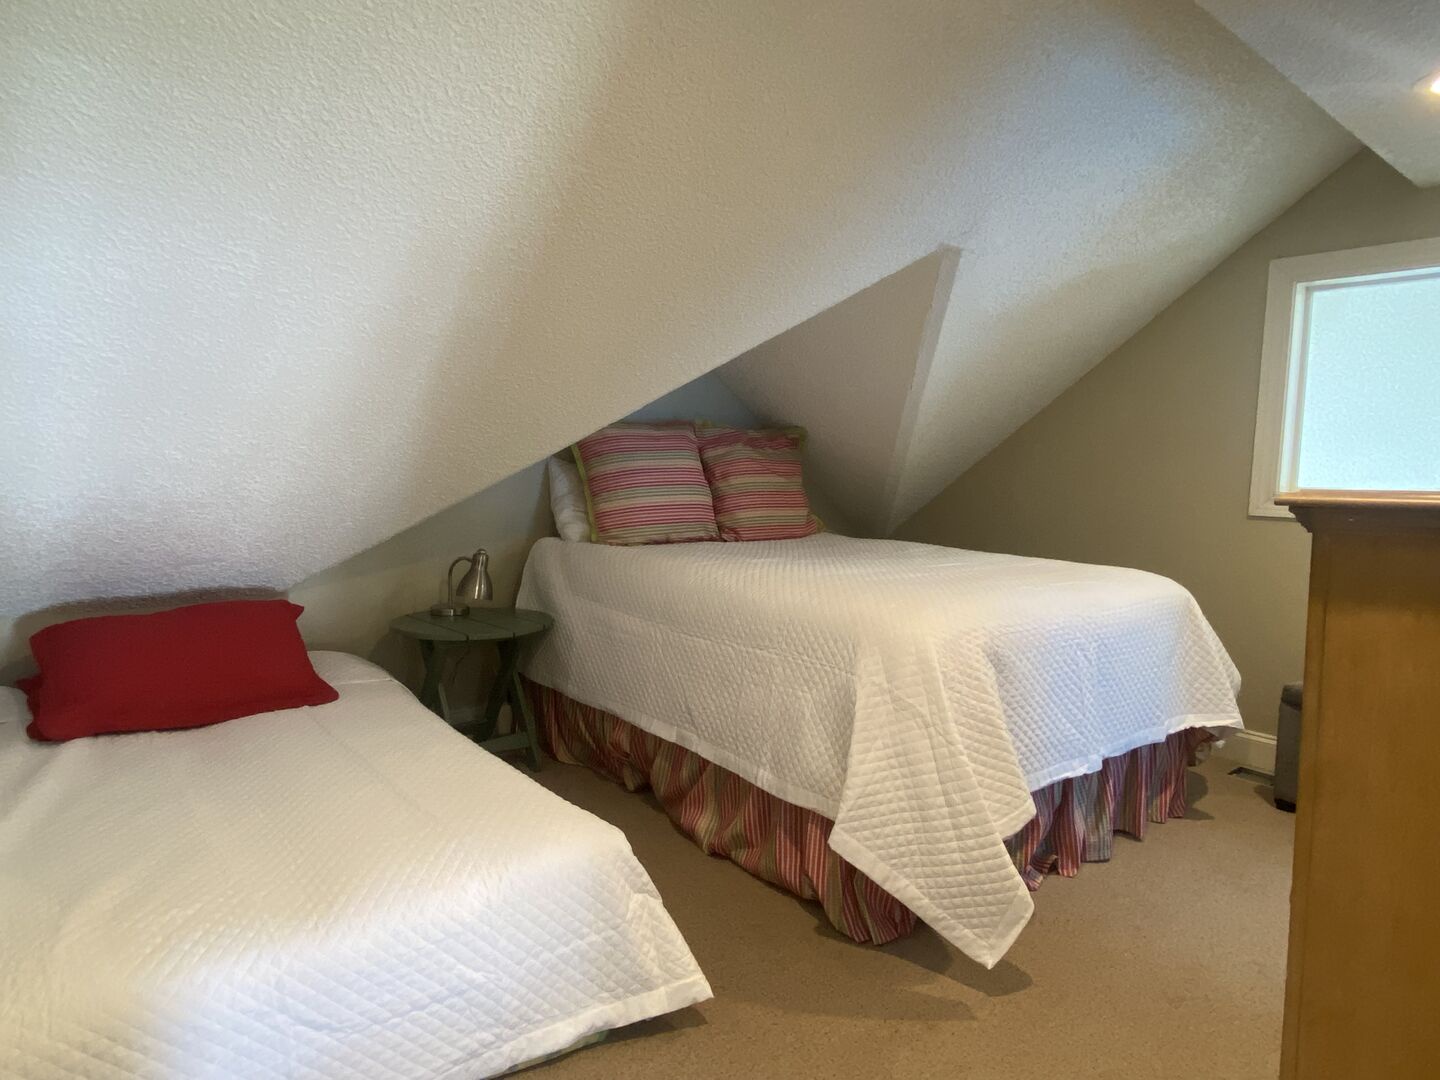 The Loft has a queen bed, twin bed and a private bathroom